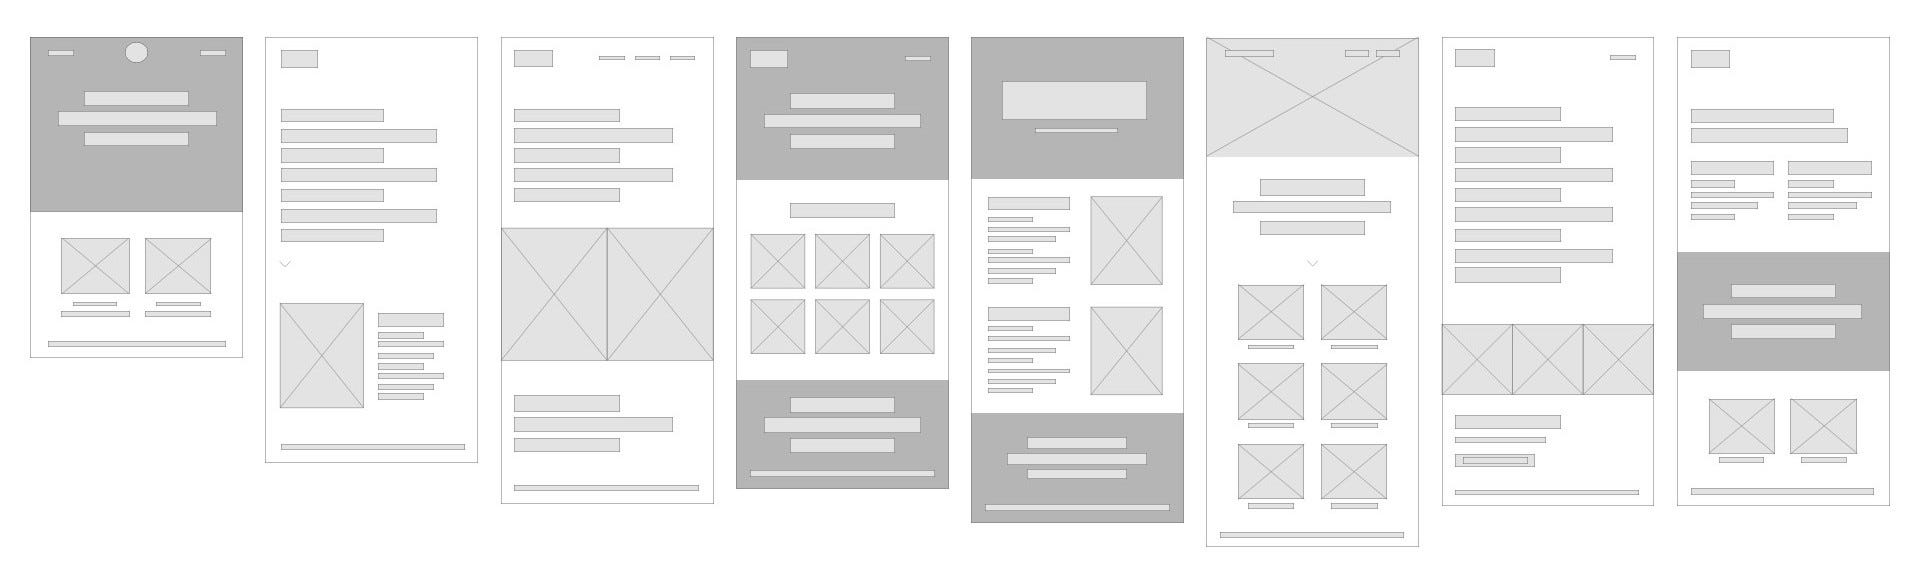 Low-fidelity wireframes for a landing page